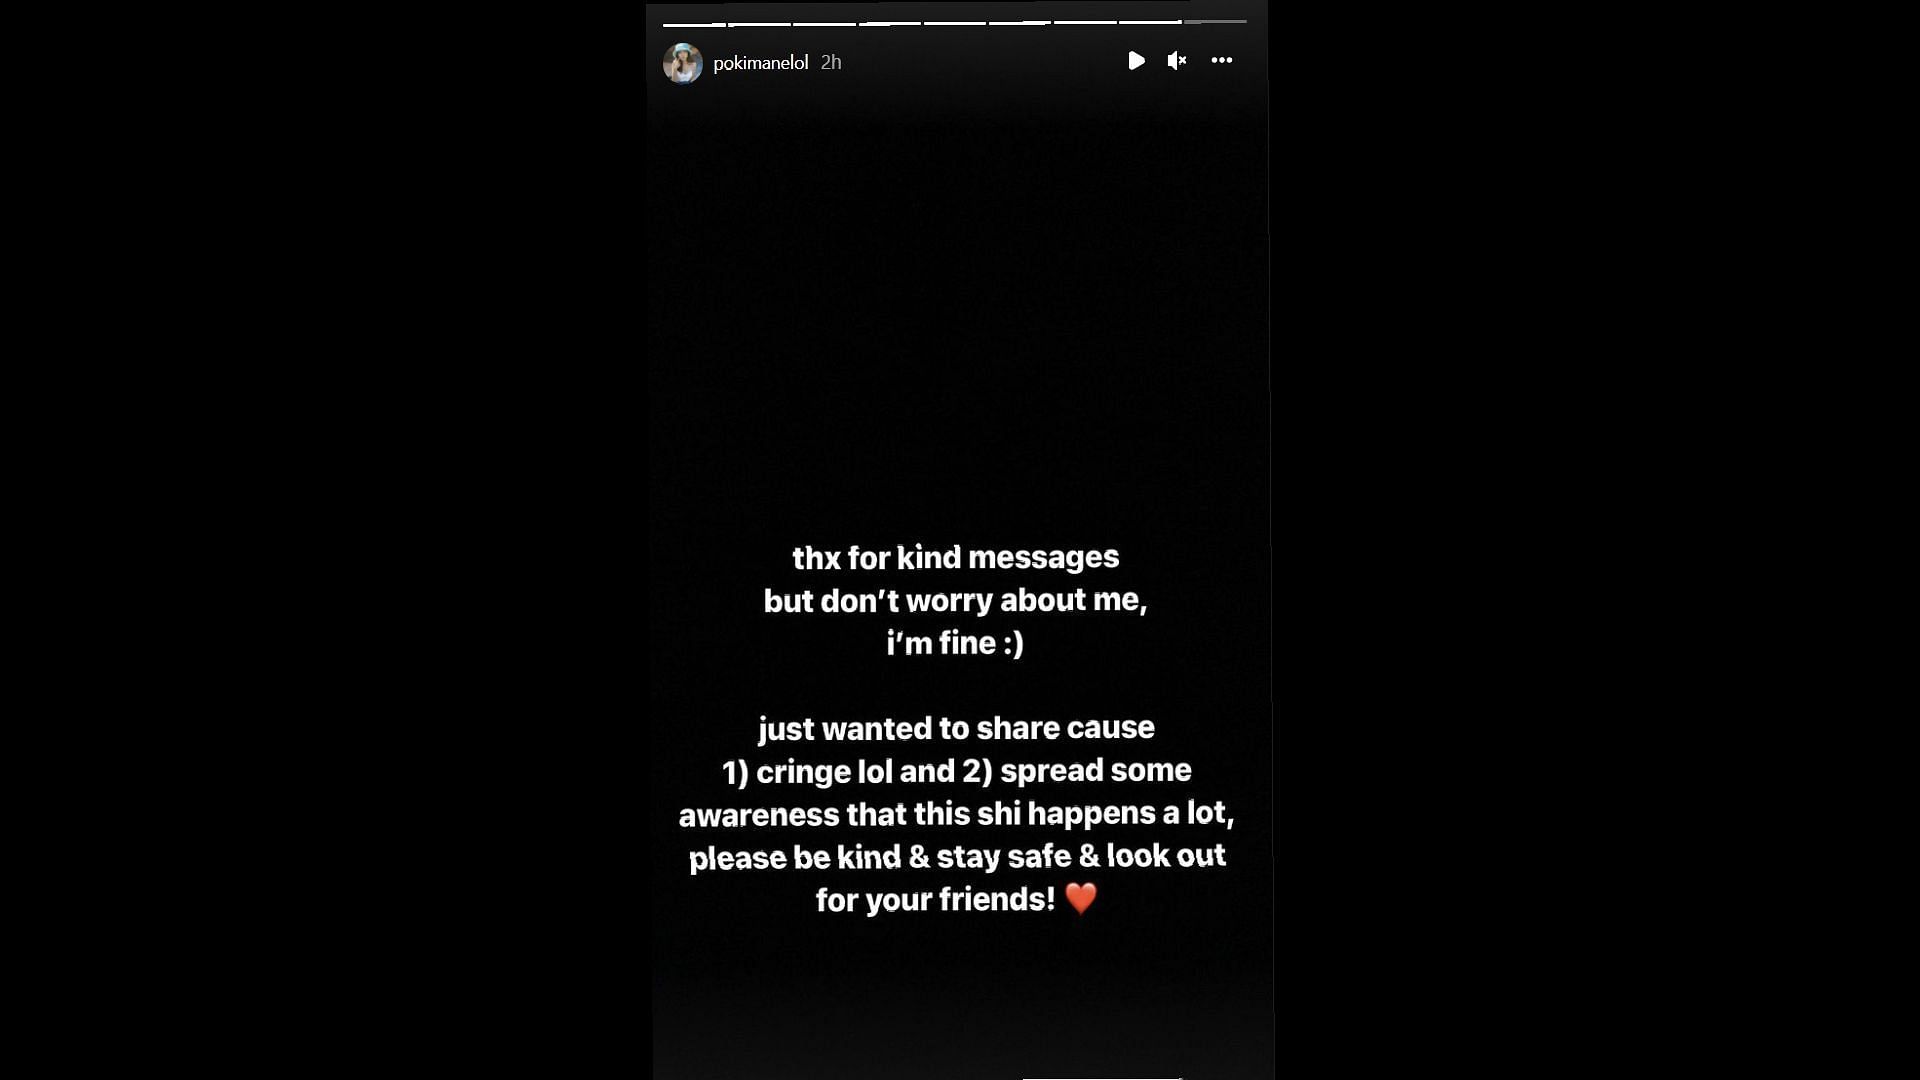 Poki mentions that she is okay and not to worry about her (Image via pokimanelol/Instagram)